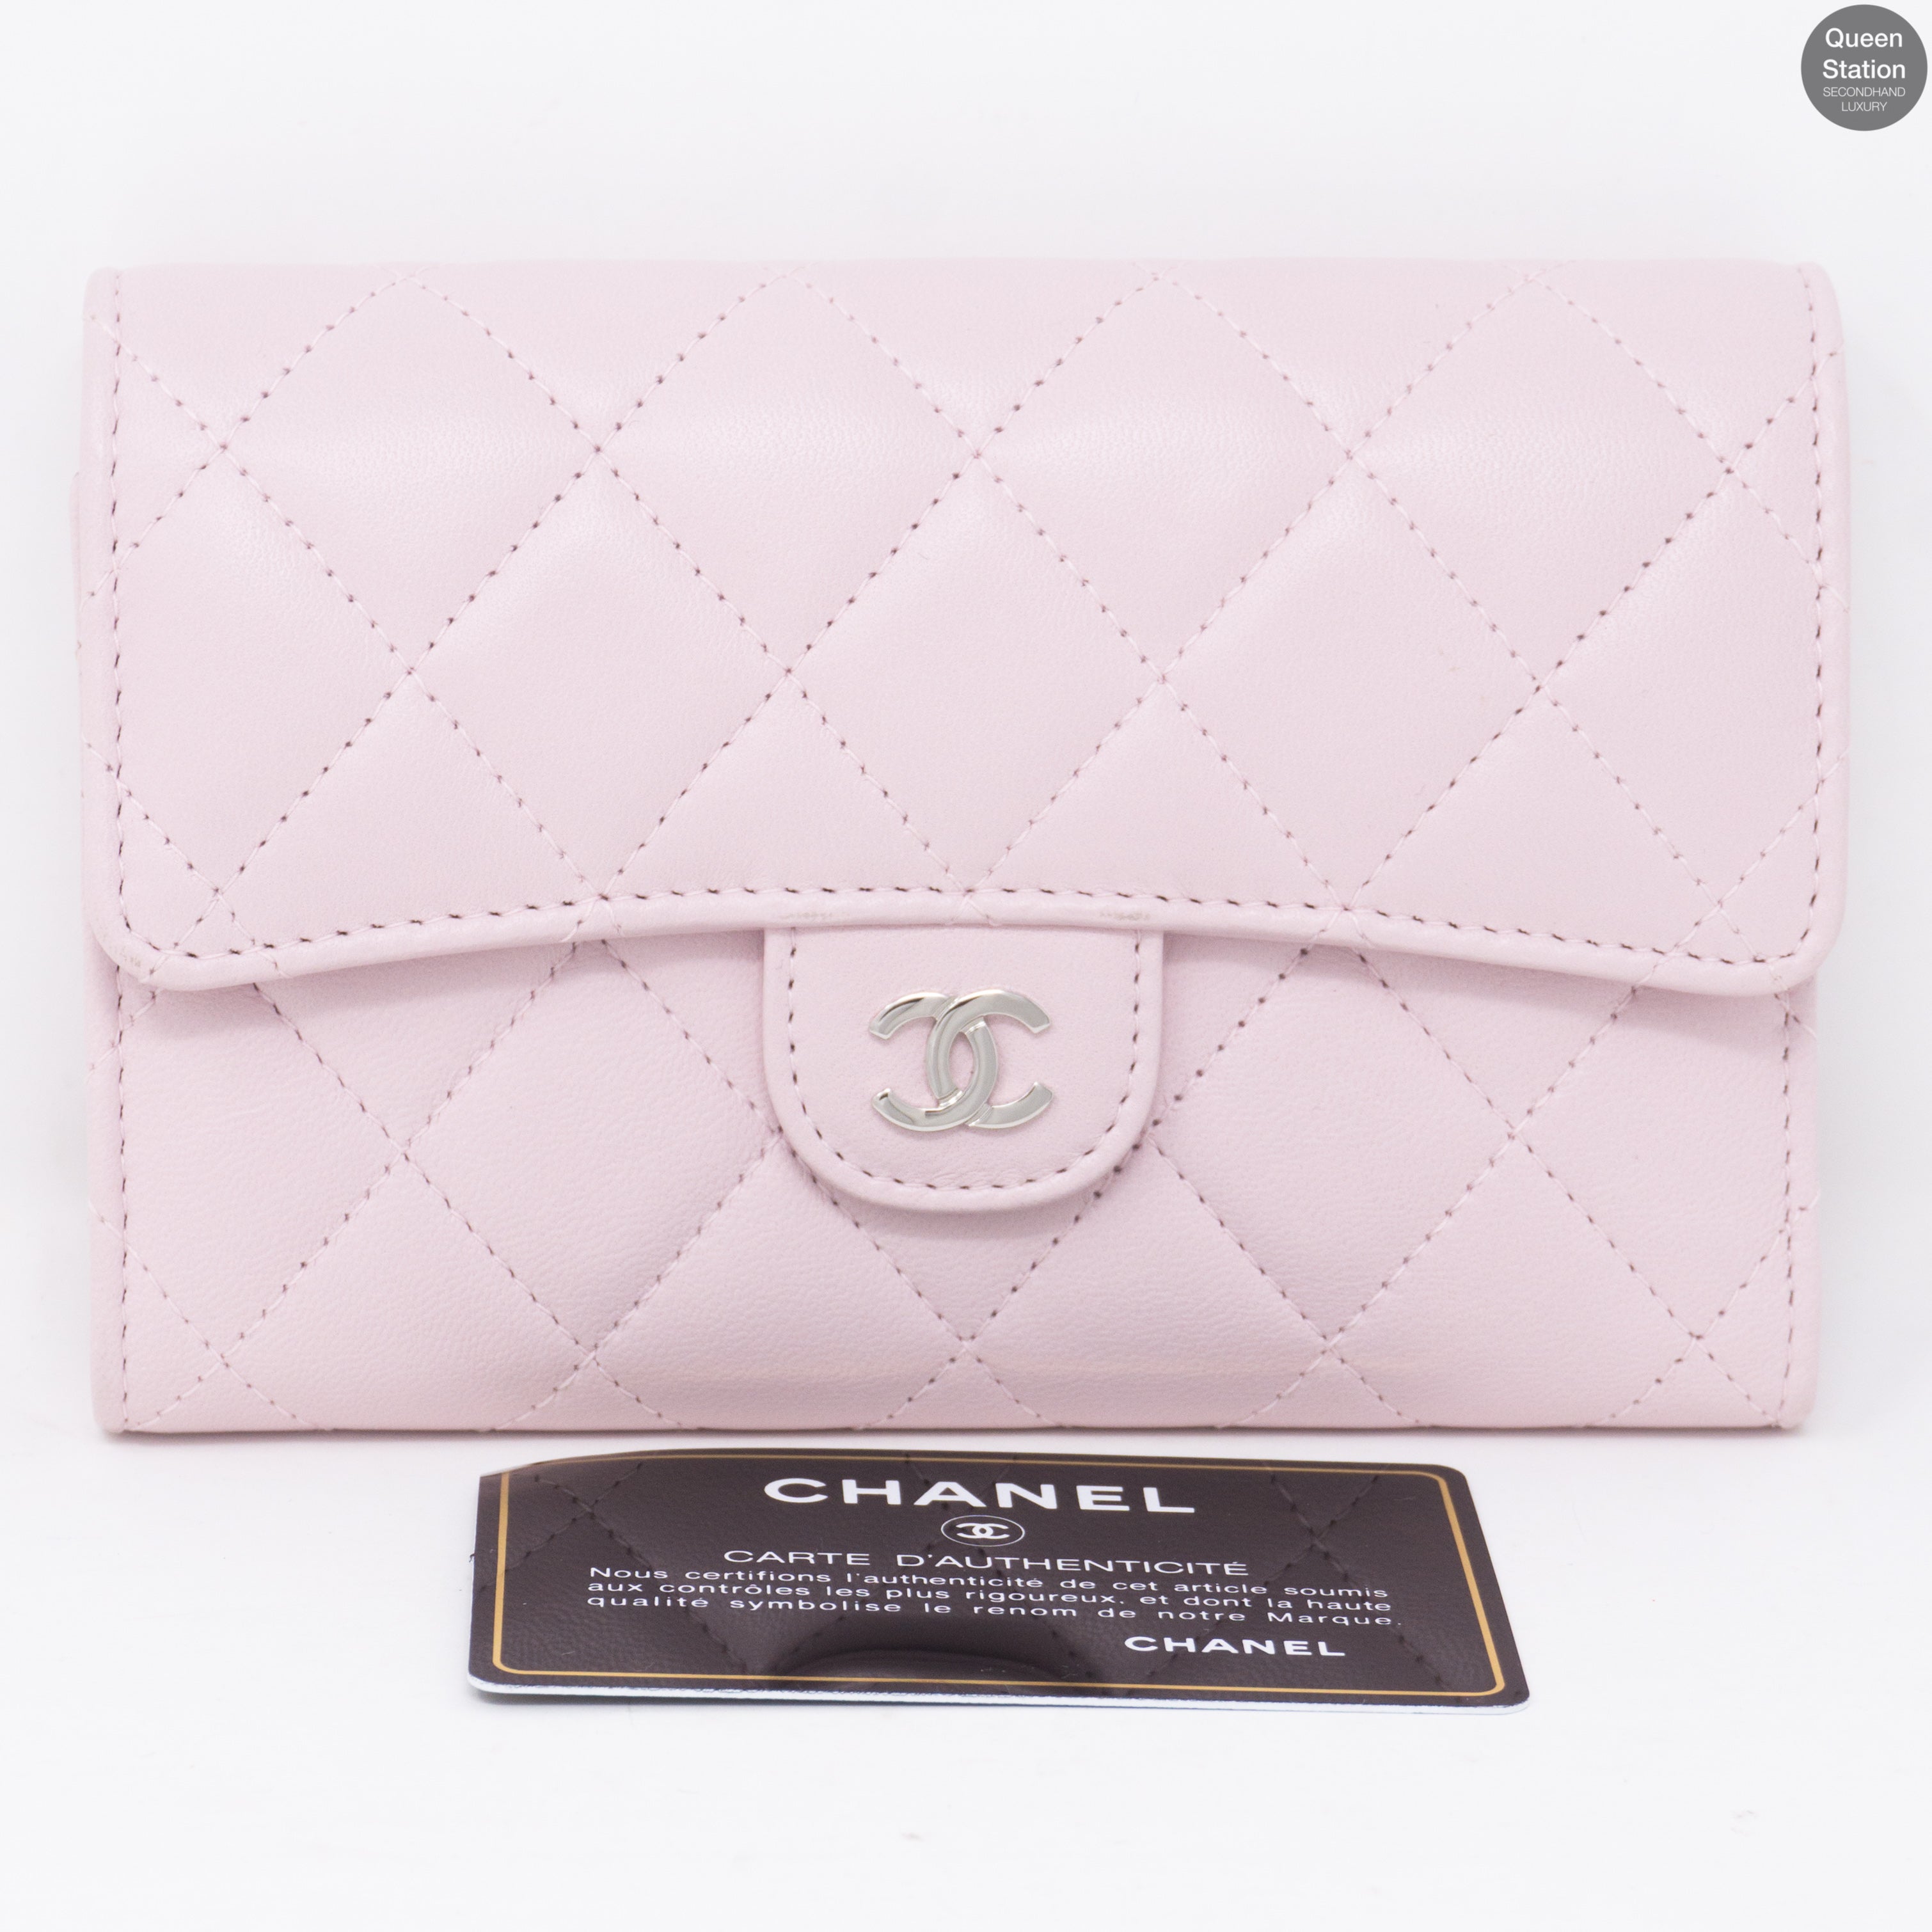 CHANEL Caviar Quilted Compact Flap Wallet Light Pink 742247